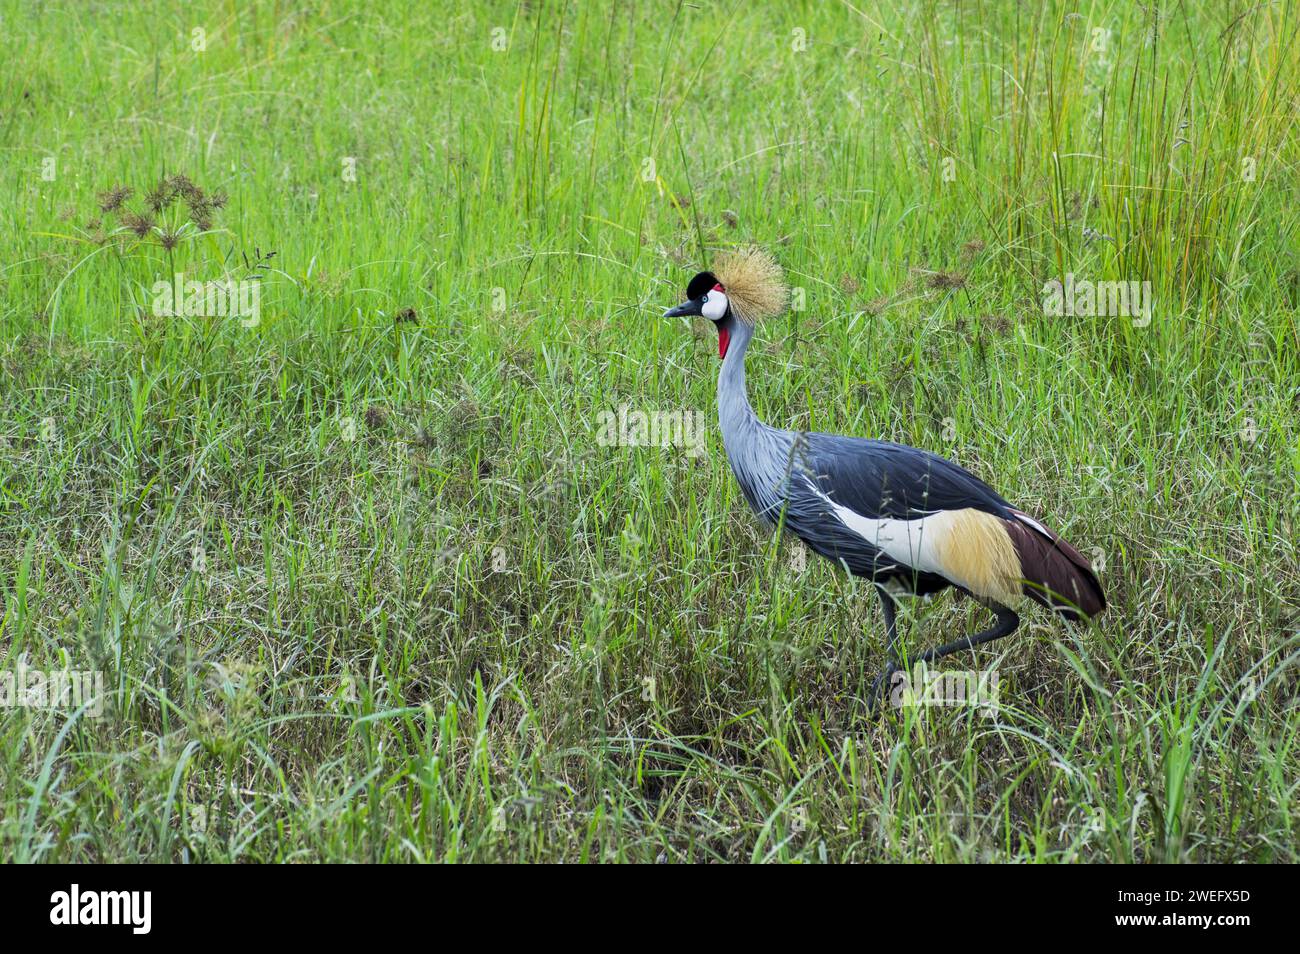 photographed on safari in Akagera National Park in Northeastern Rwanda, Central Africa’s largest protected wetland. Africa Parks Stock Photo